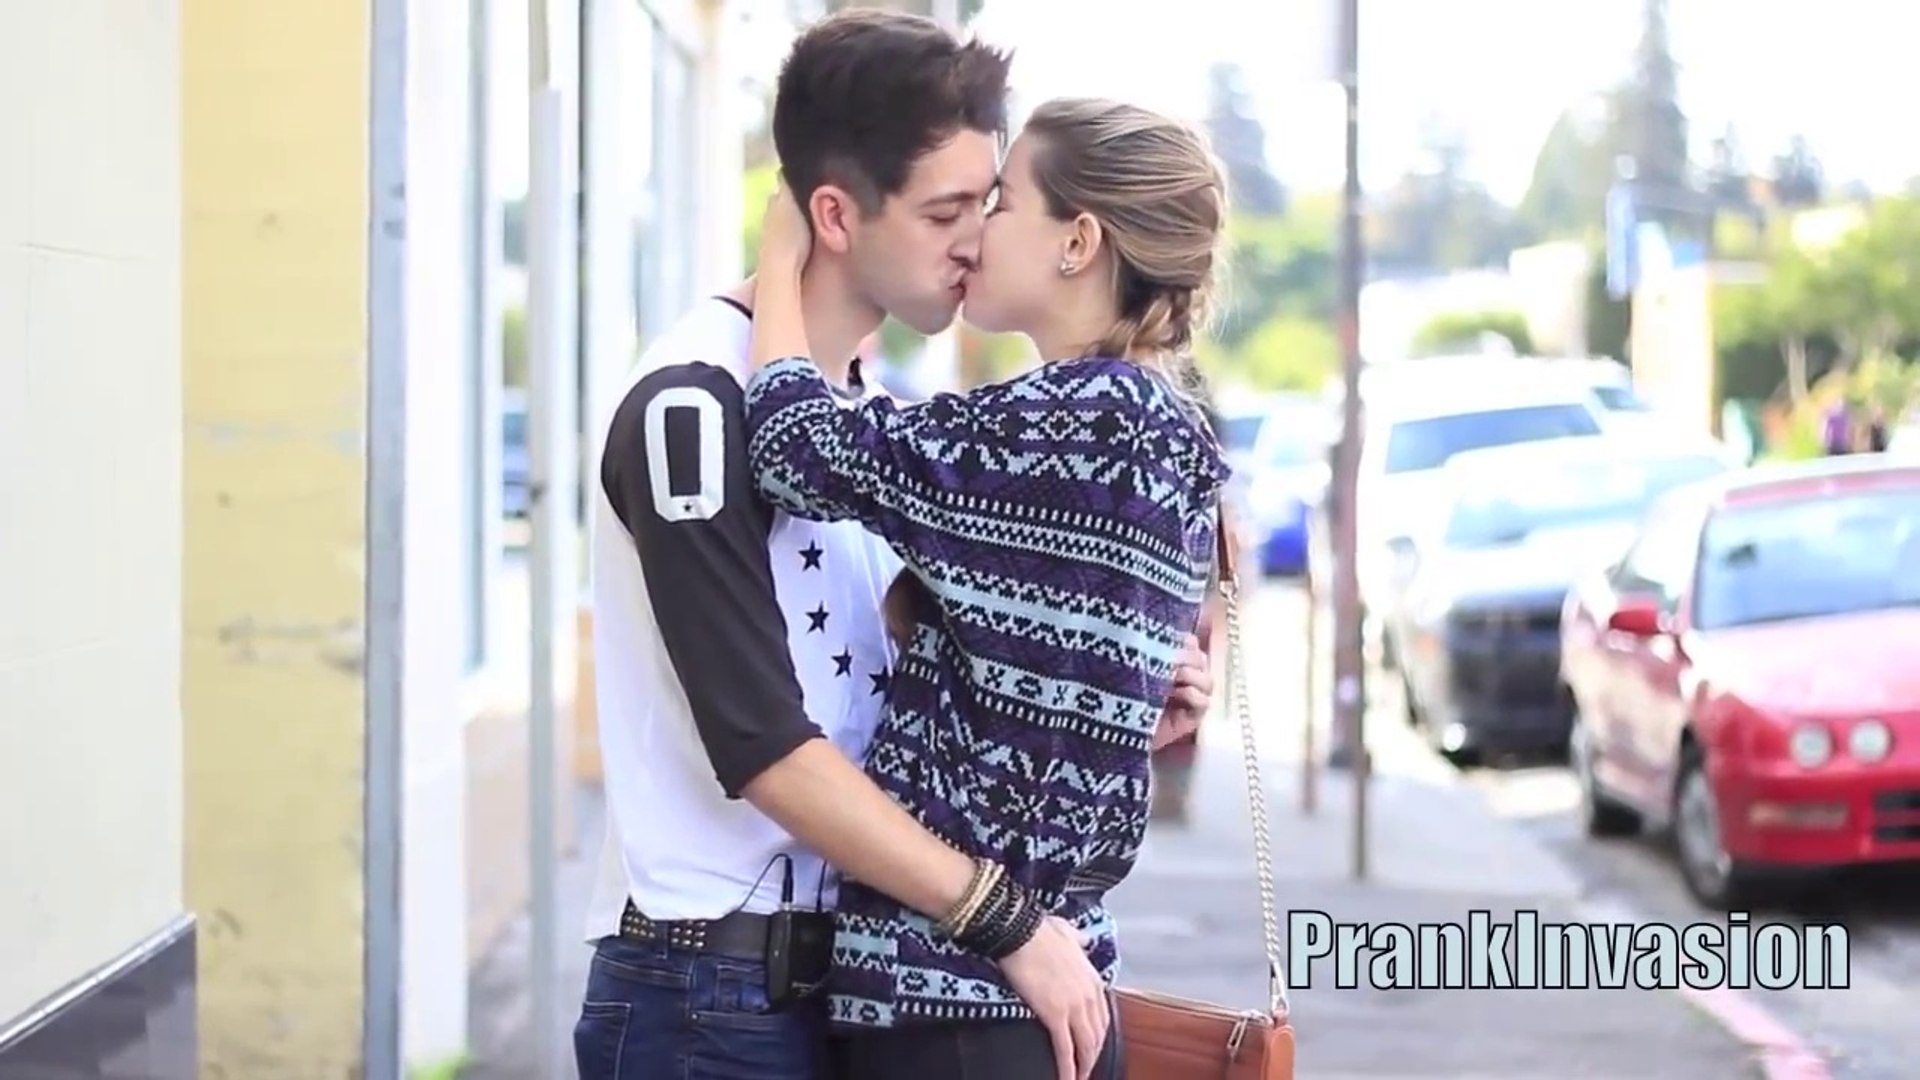 brandon cary recommends kissing prank sneaky name pic